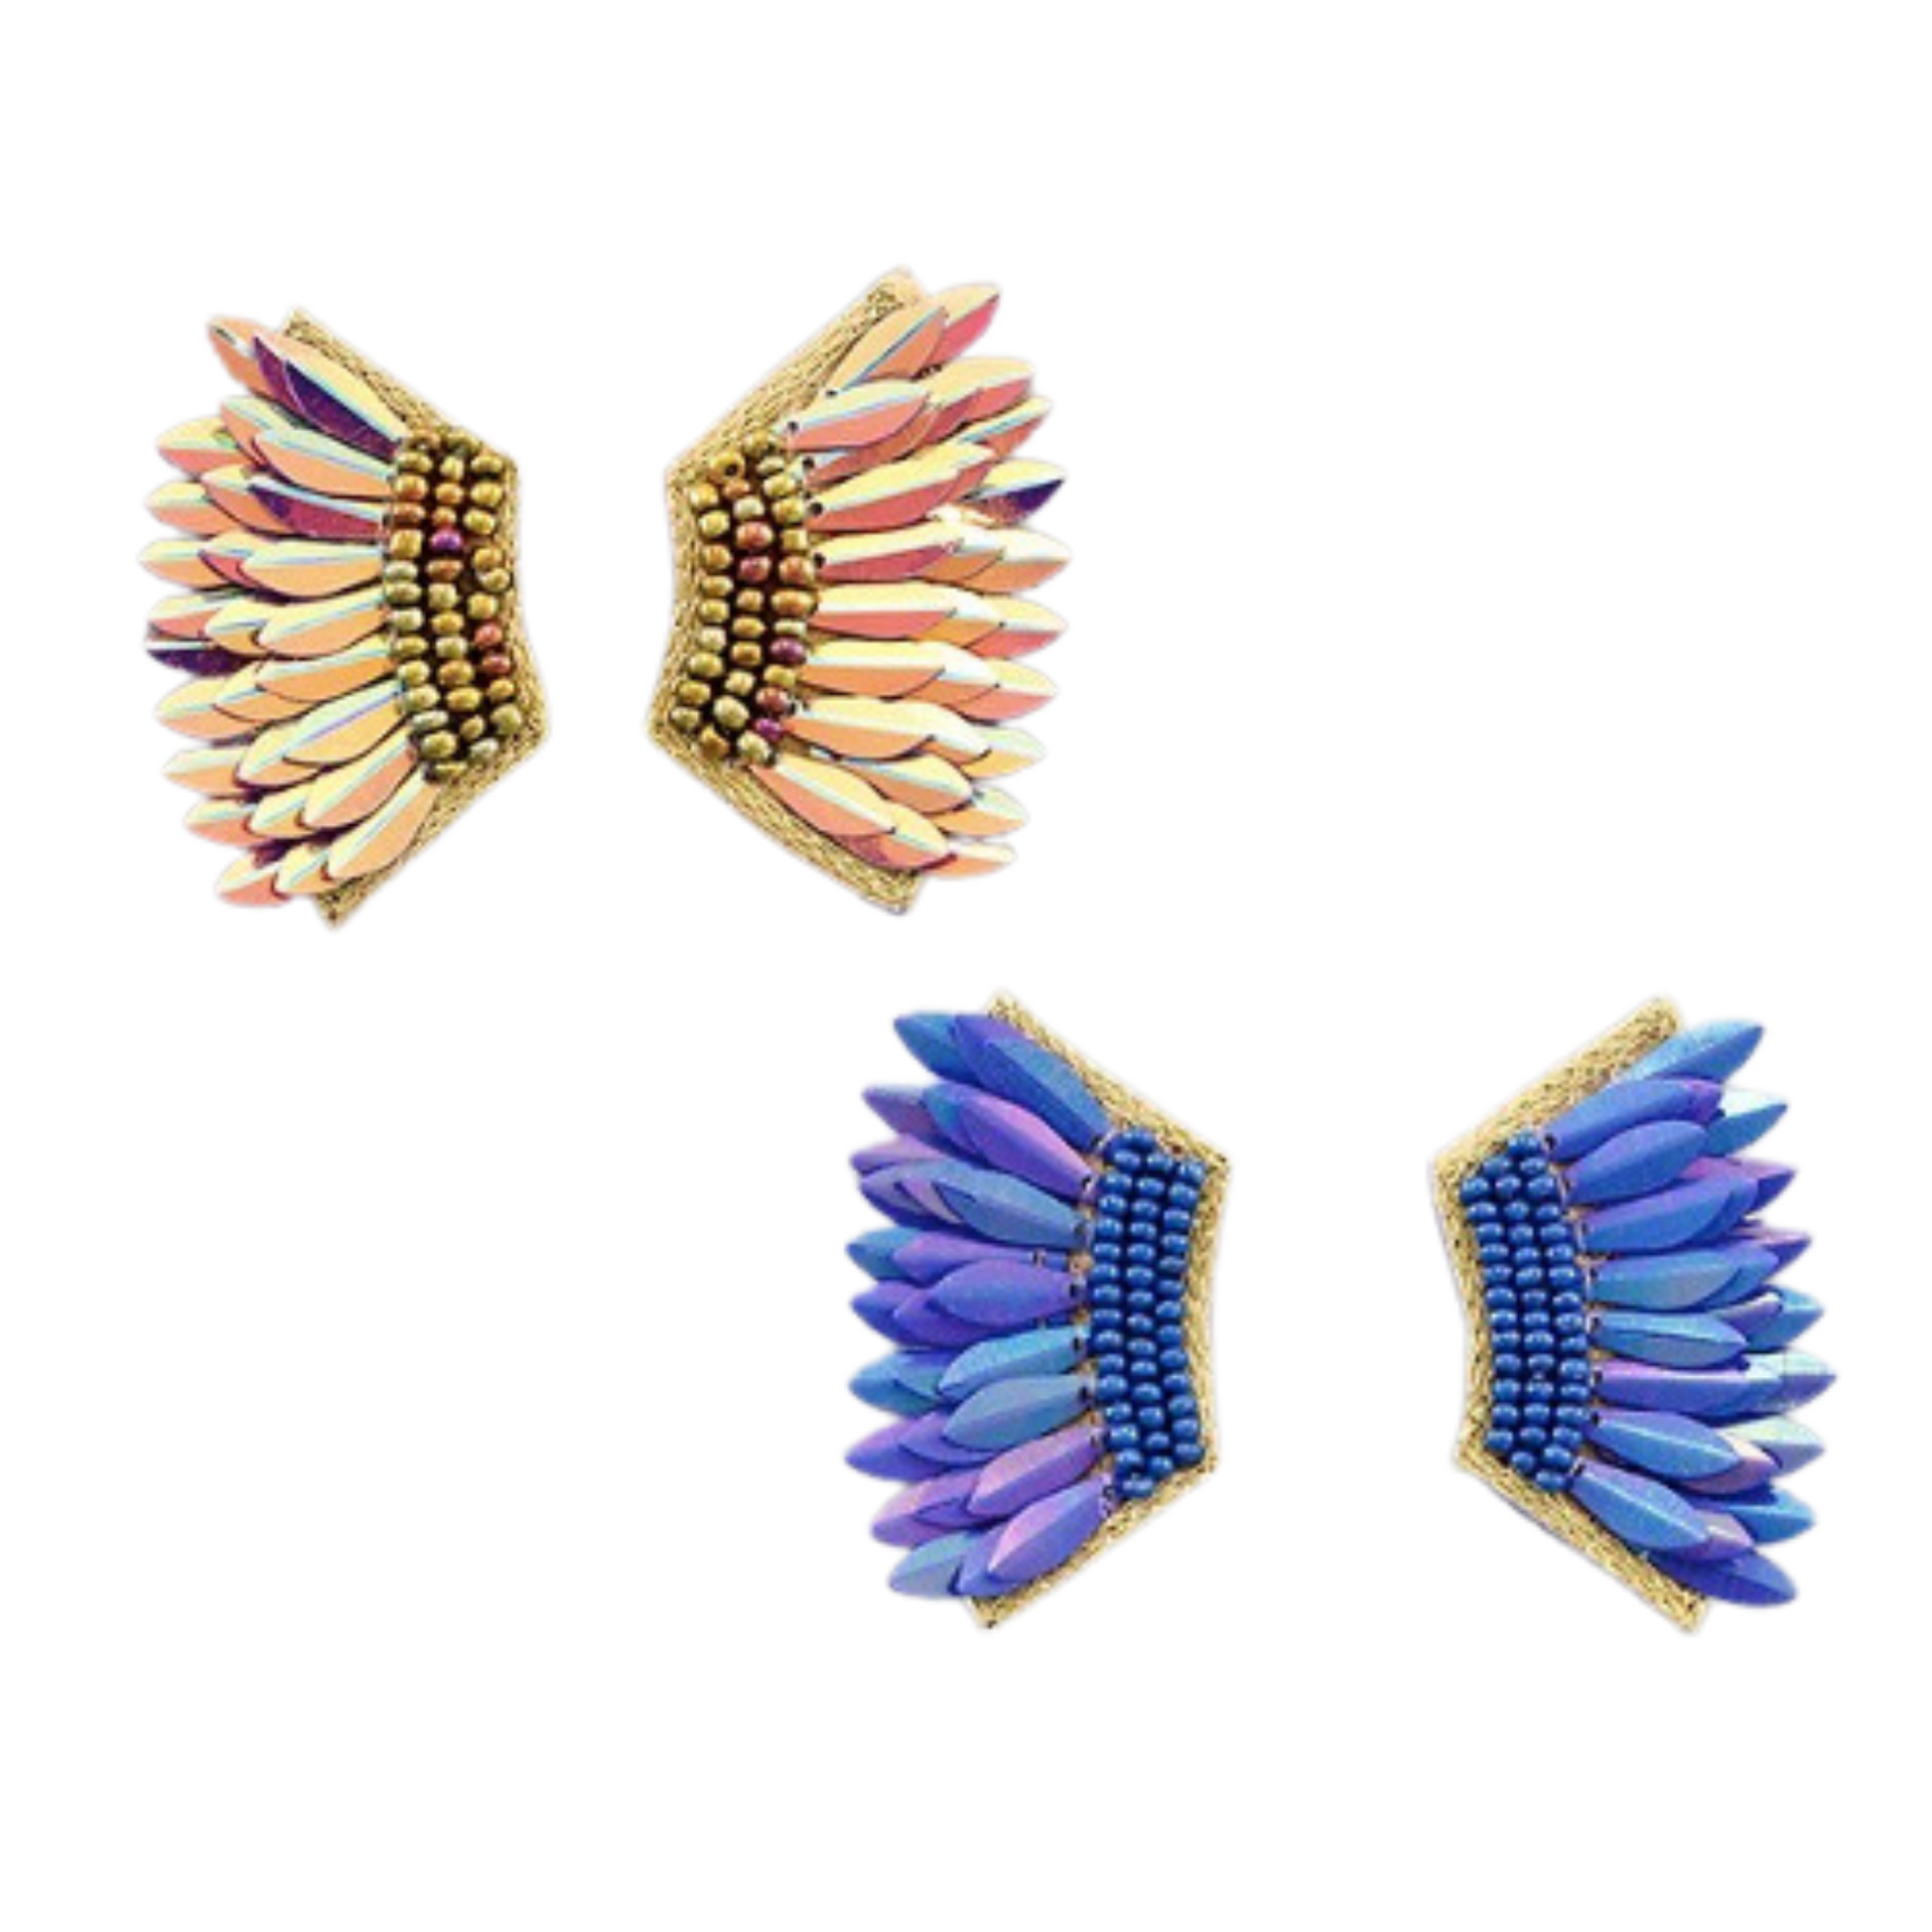 iridescent angel wing earrings. Available in Pink or Blue